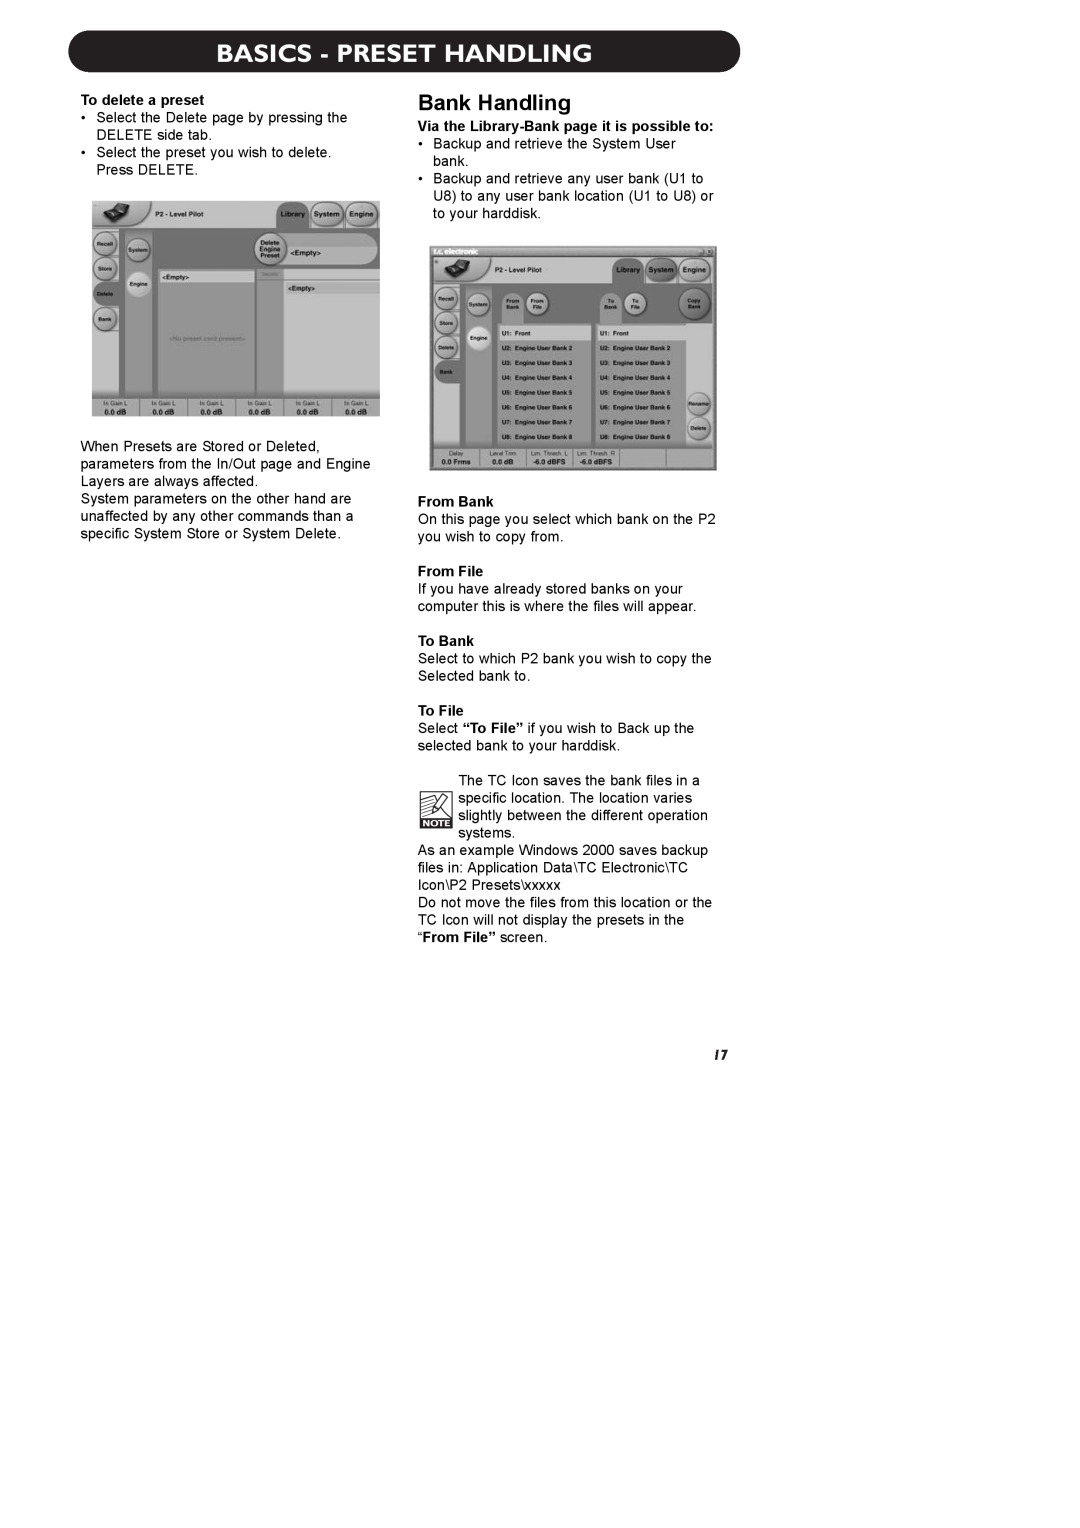 TC electronic SDN BHD P2 manual Basics - Preset Handling, Bank Handling, To delete a preset, From Bank, From File, To Bank 